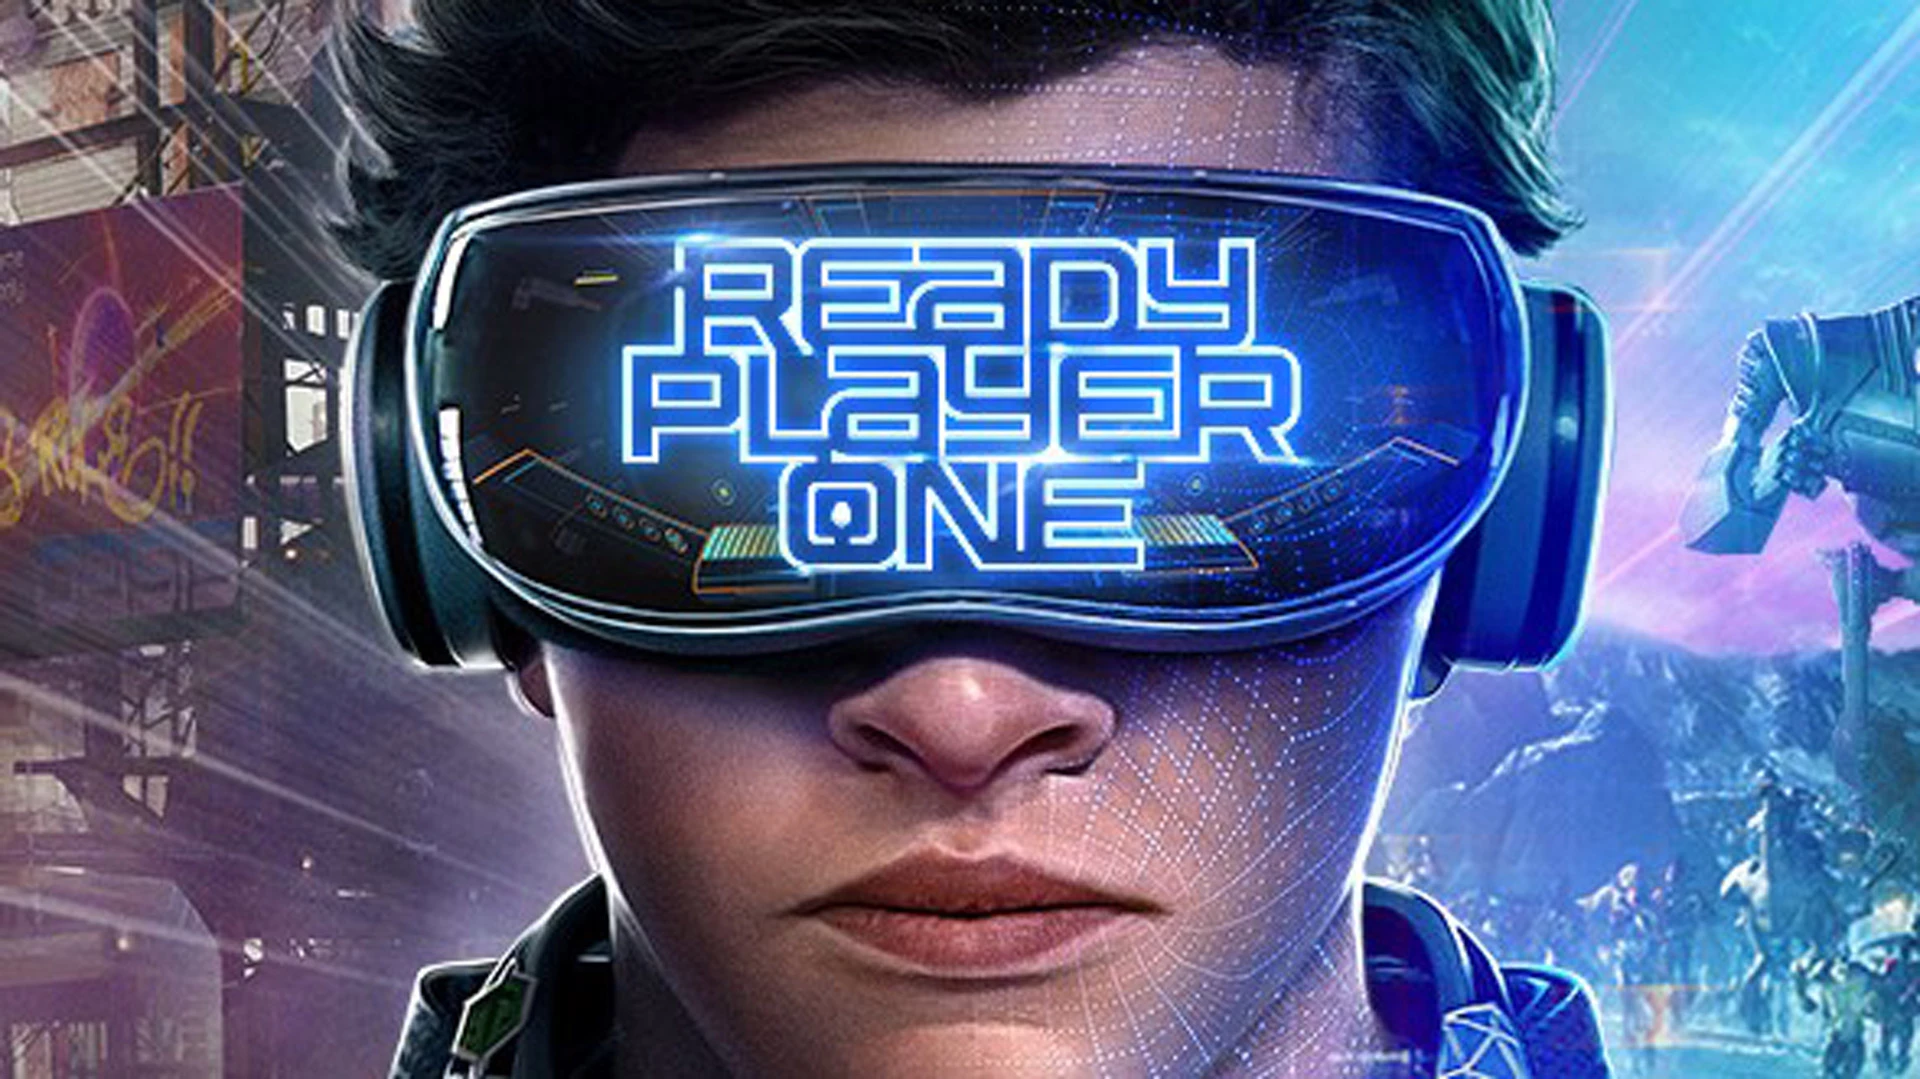 movies like nerve - Ready Player One (2018)